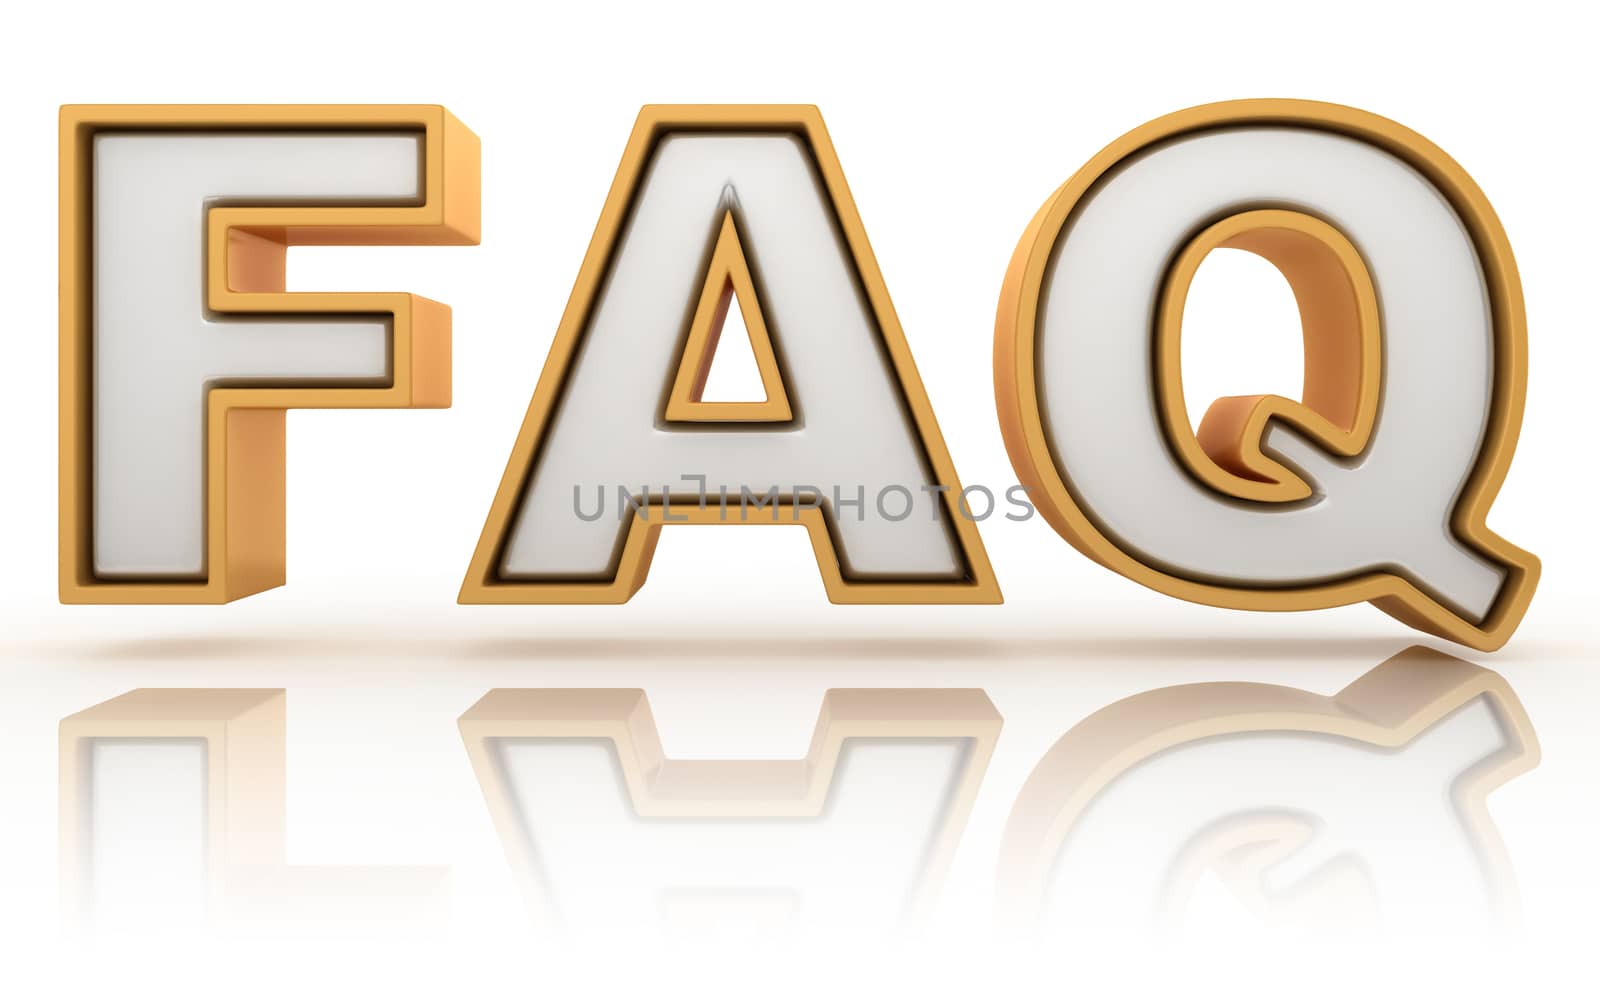 FAQ - frequently asked question abbreviation, golden letter sign by djmilic